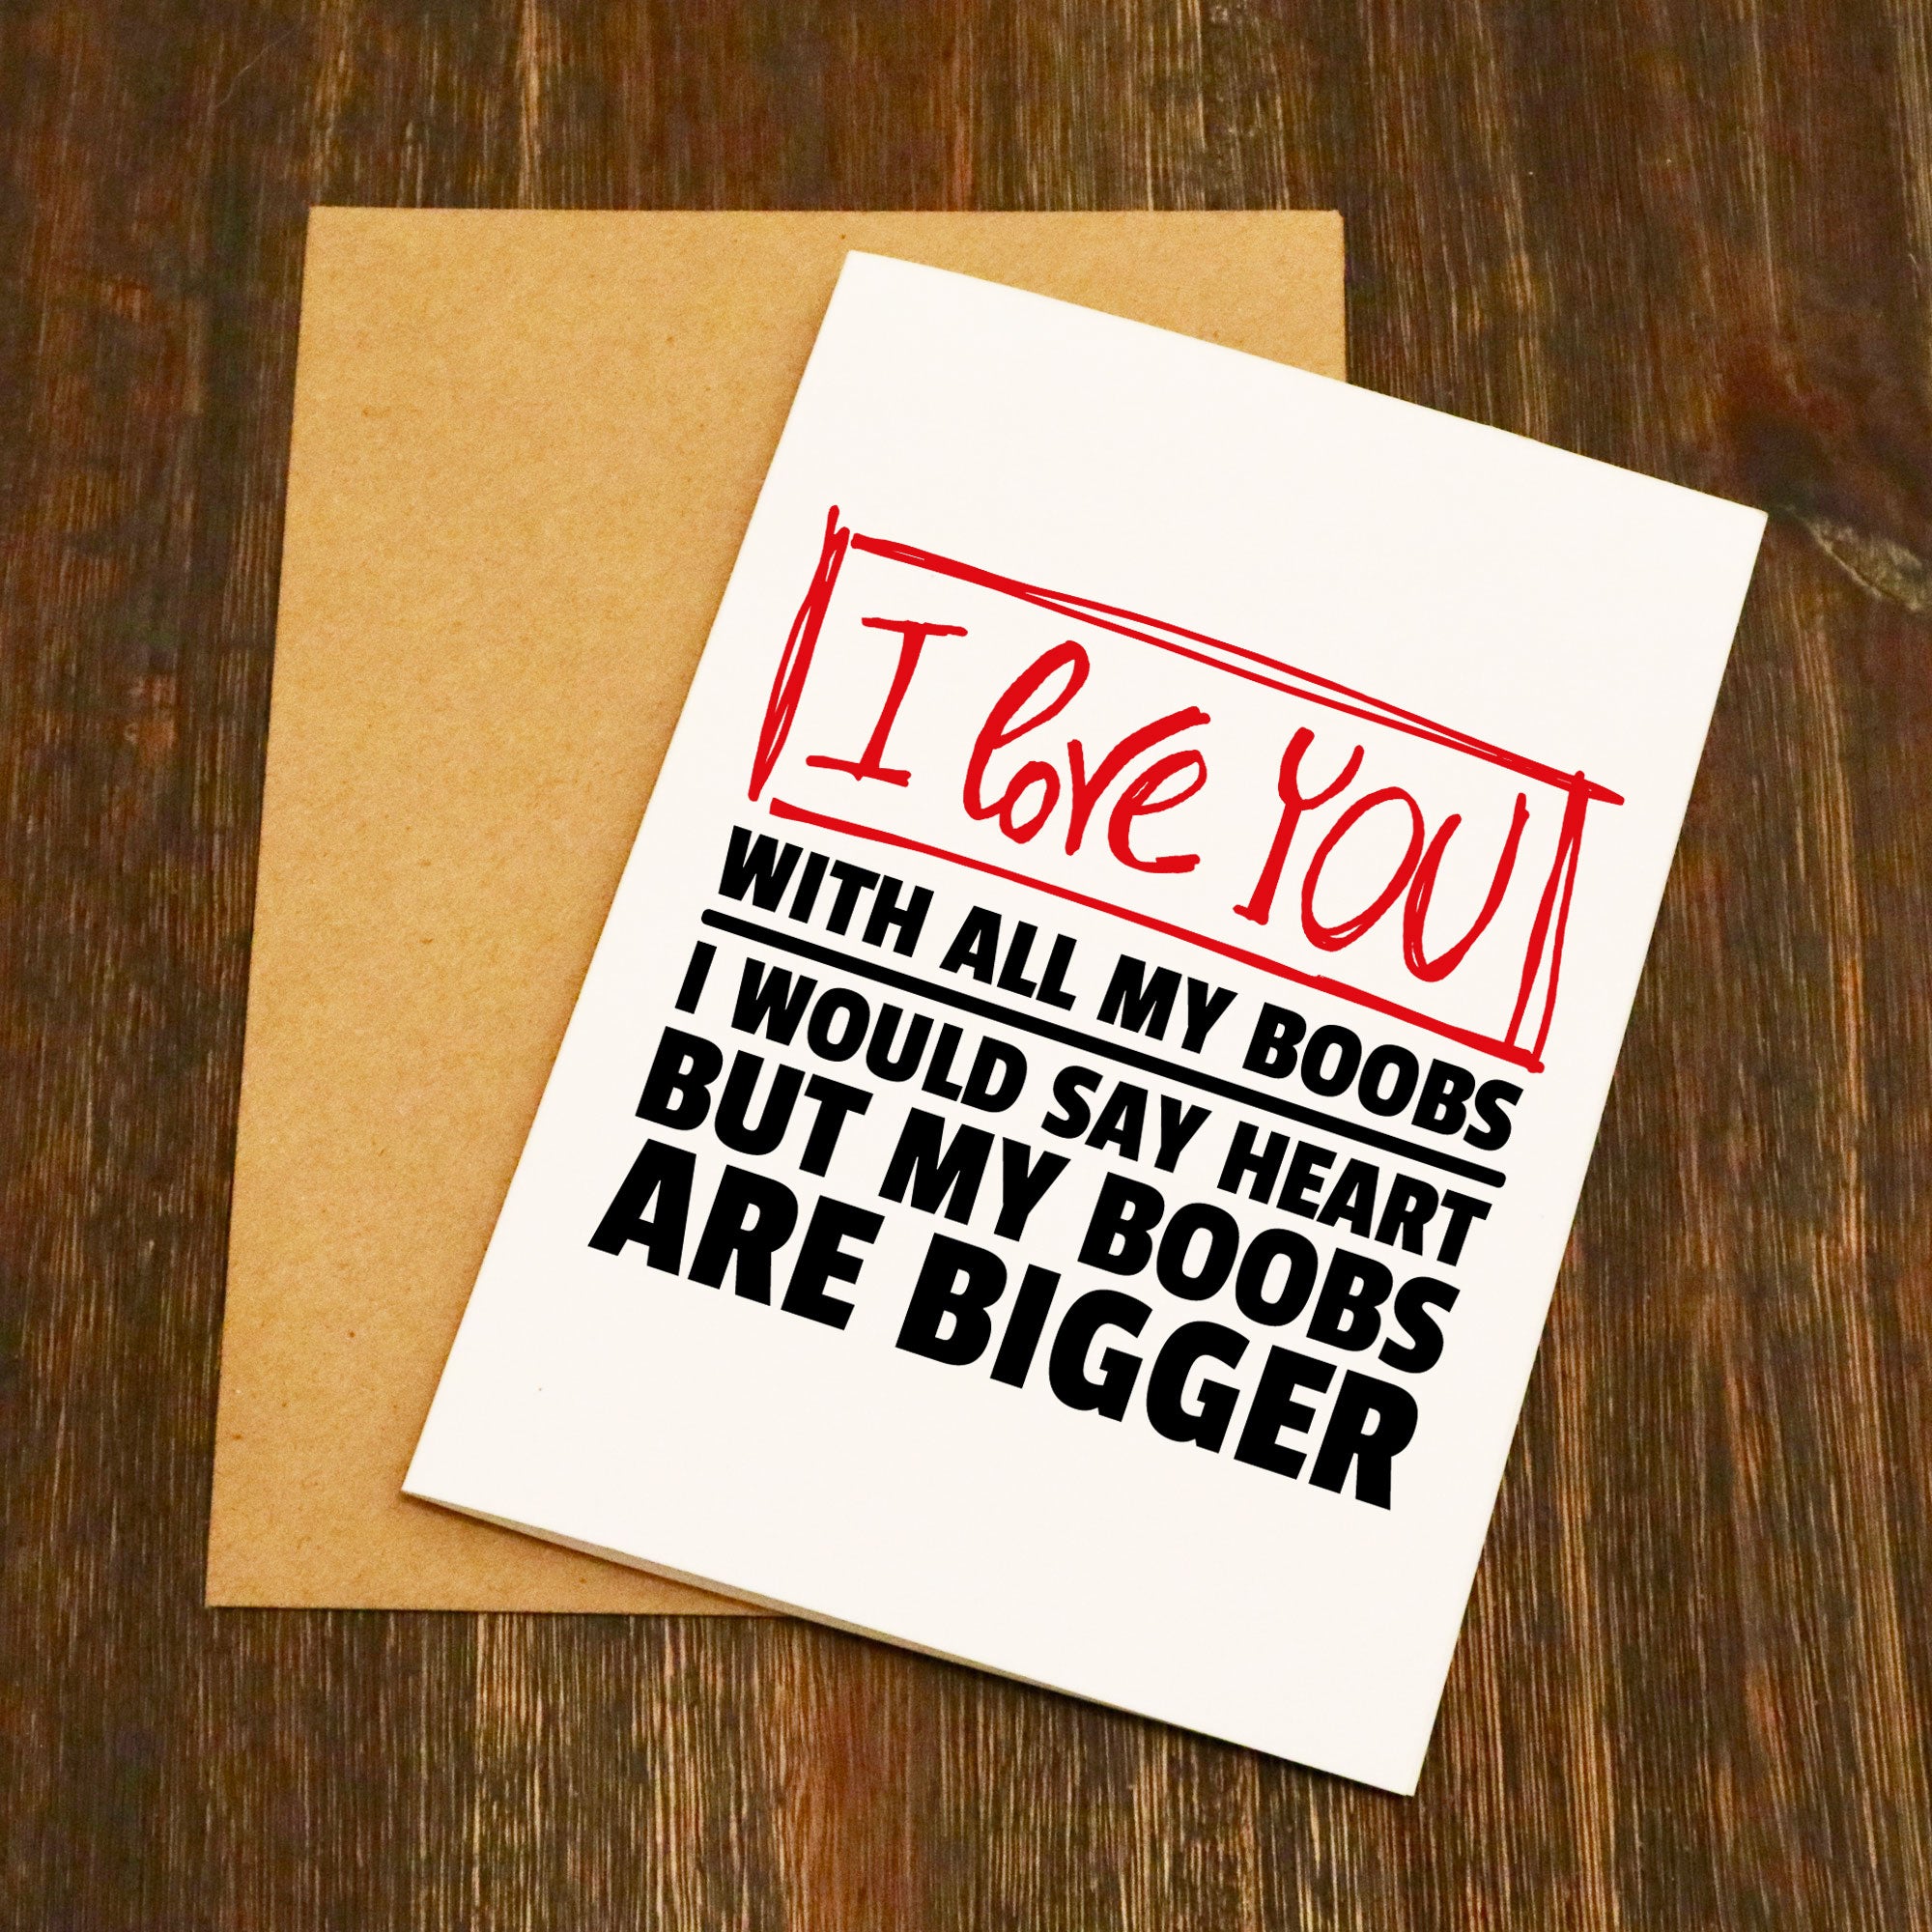 I Love You With All My Boobs Card